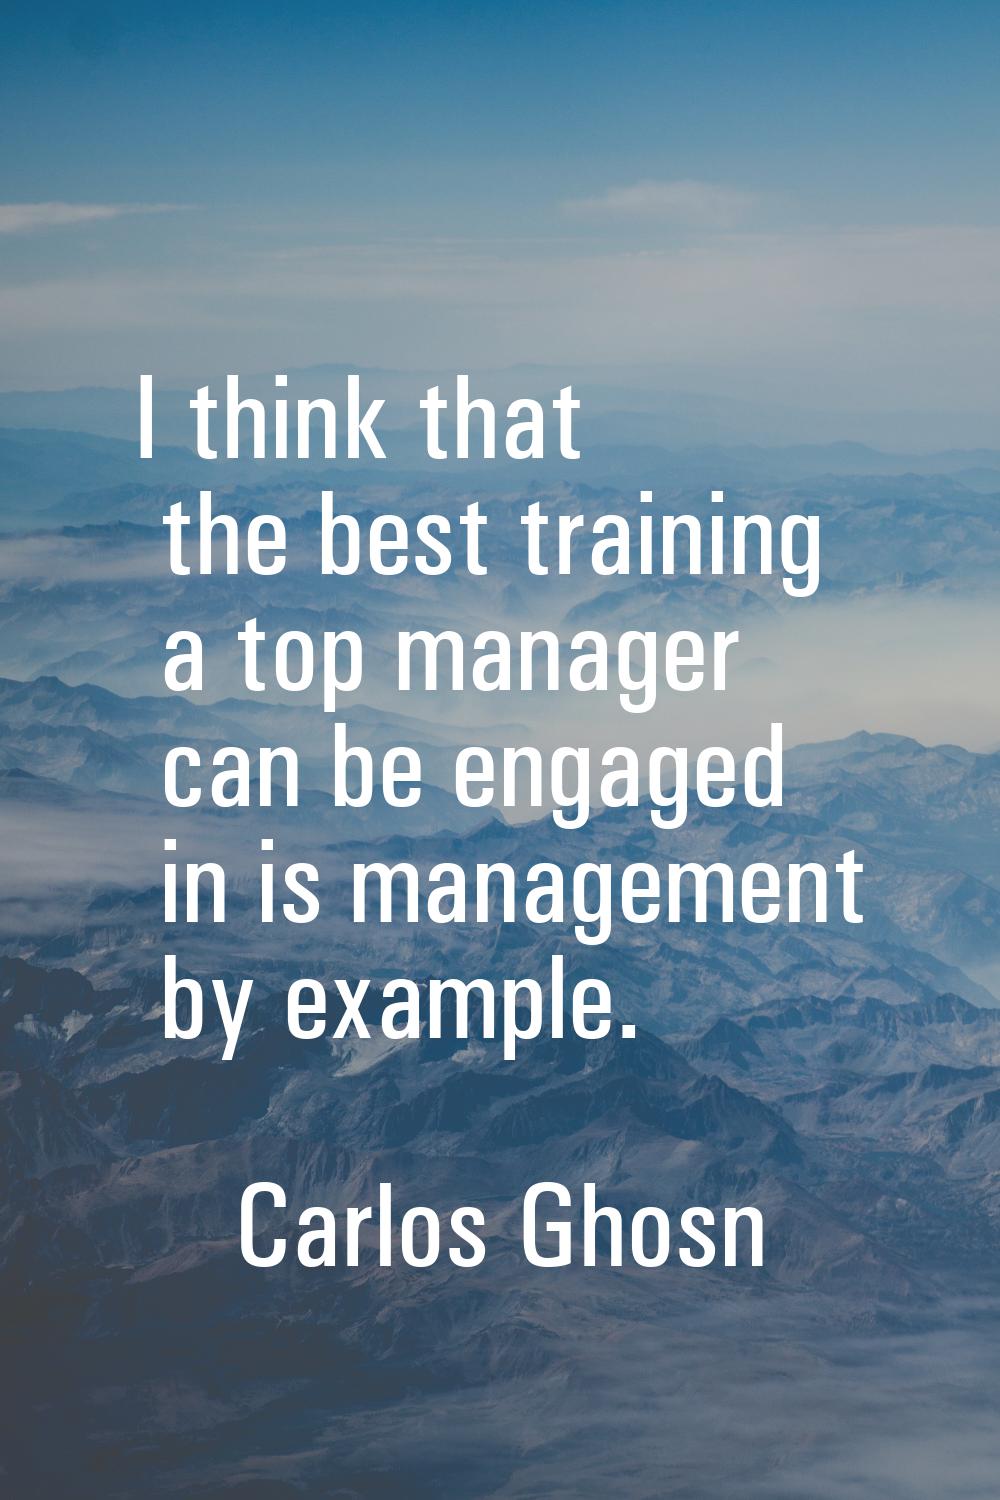 I think that the best training a top manager can be engaged in is management by example.